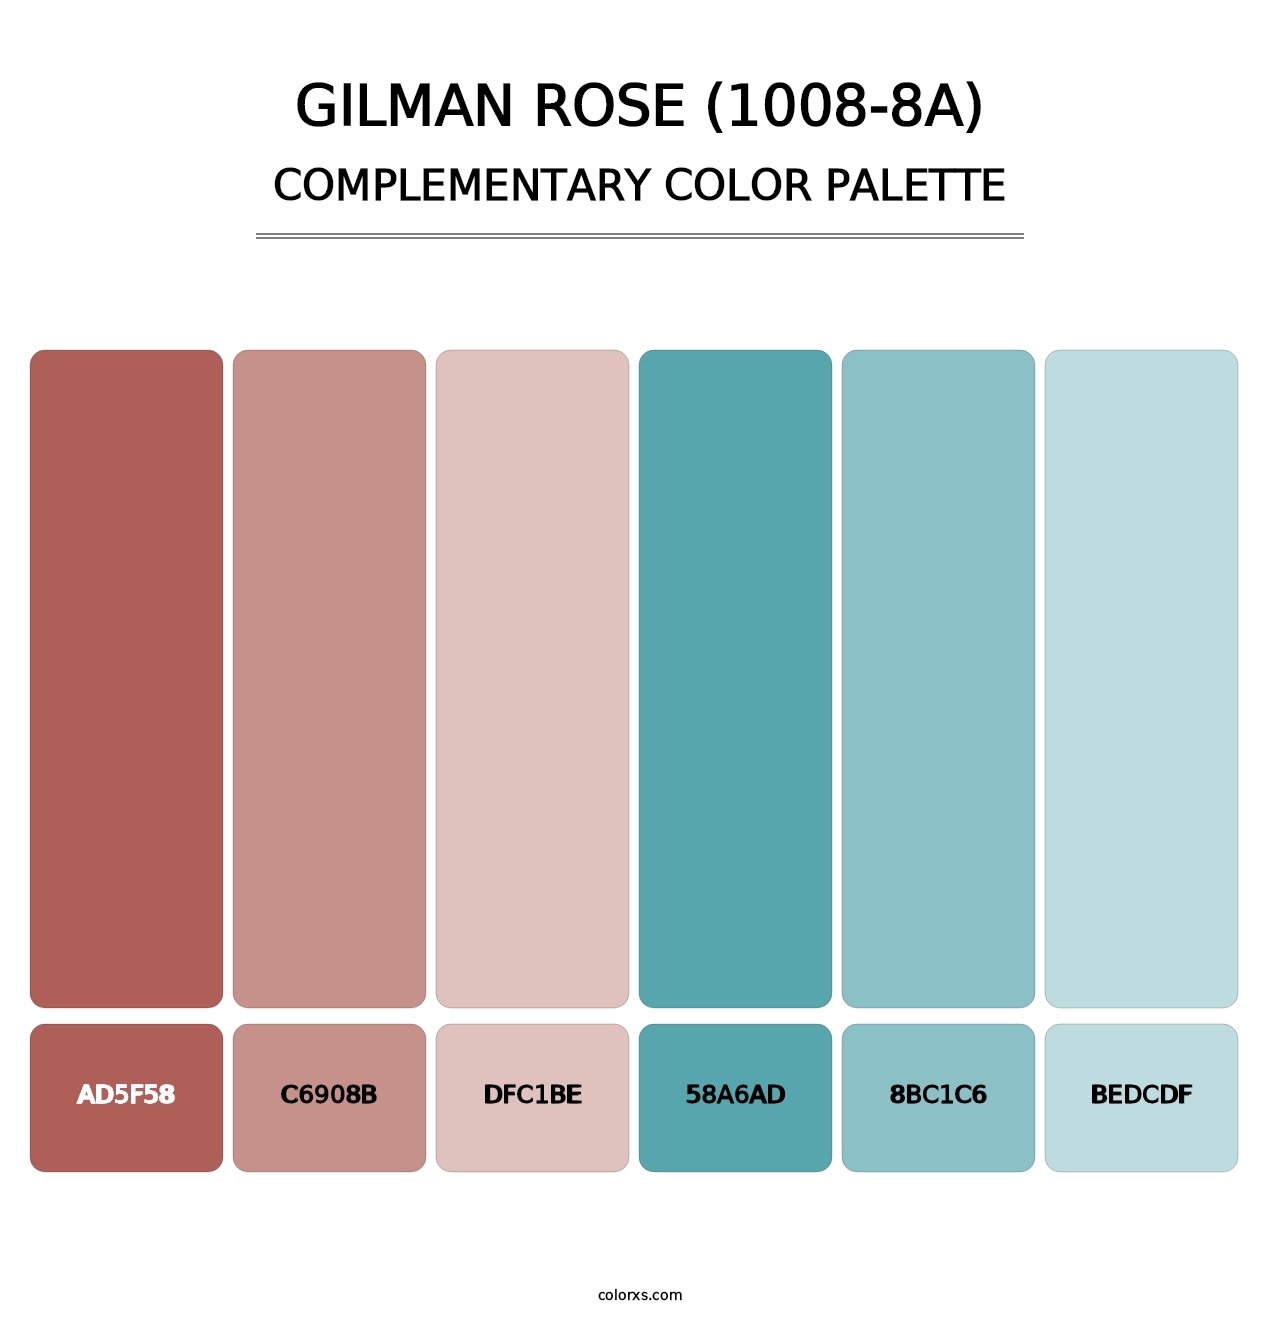 Gilman Rose (1008-8A) - Complementary Color Palette